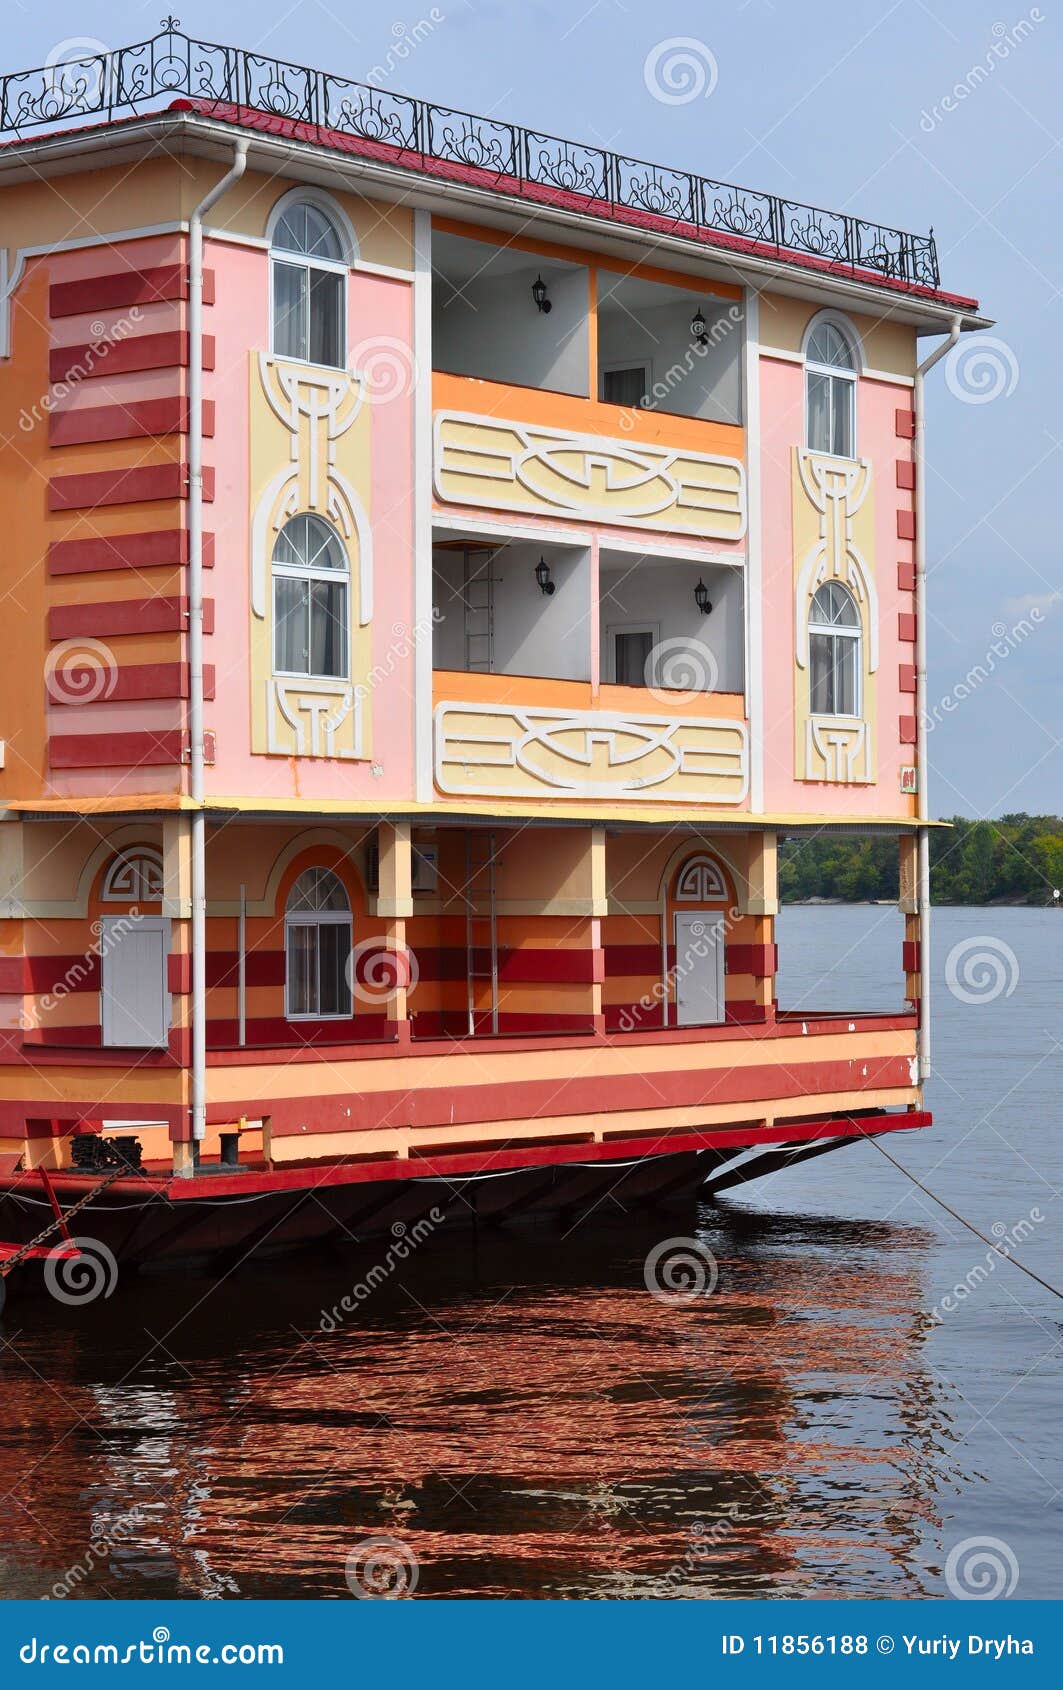 houseboat clipart - photo #50